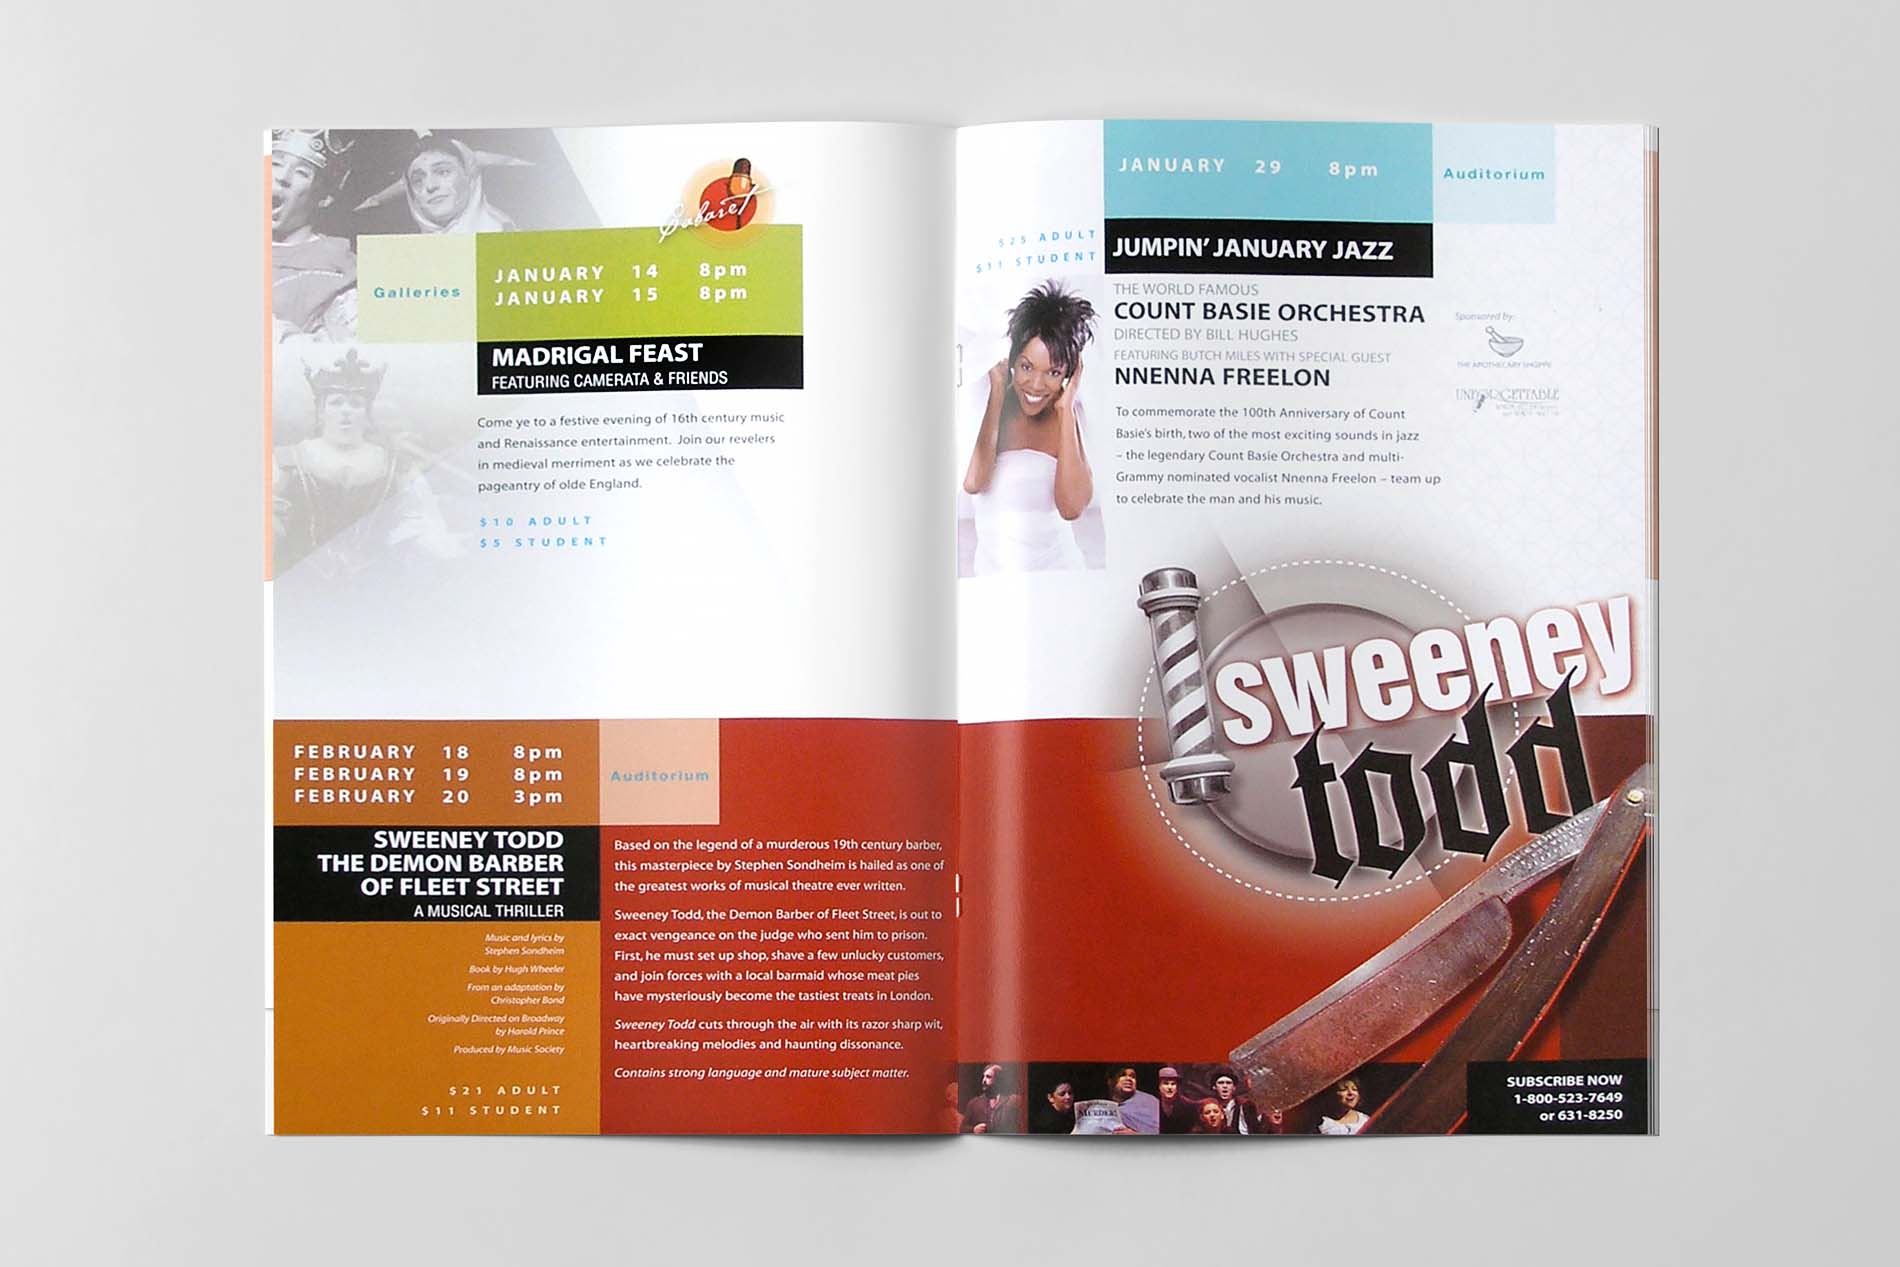 ip Music Society Midland Center for the Arts season catalog spread mockup by Design Direction